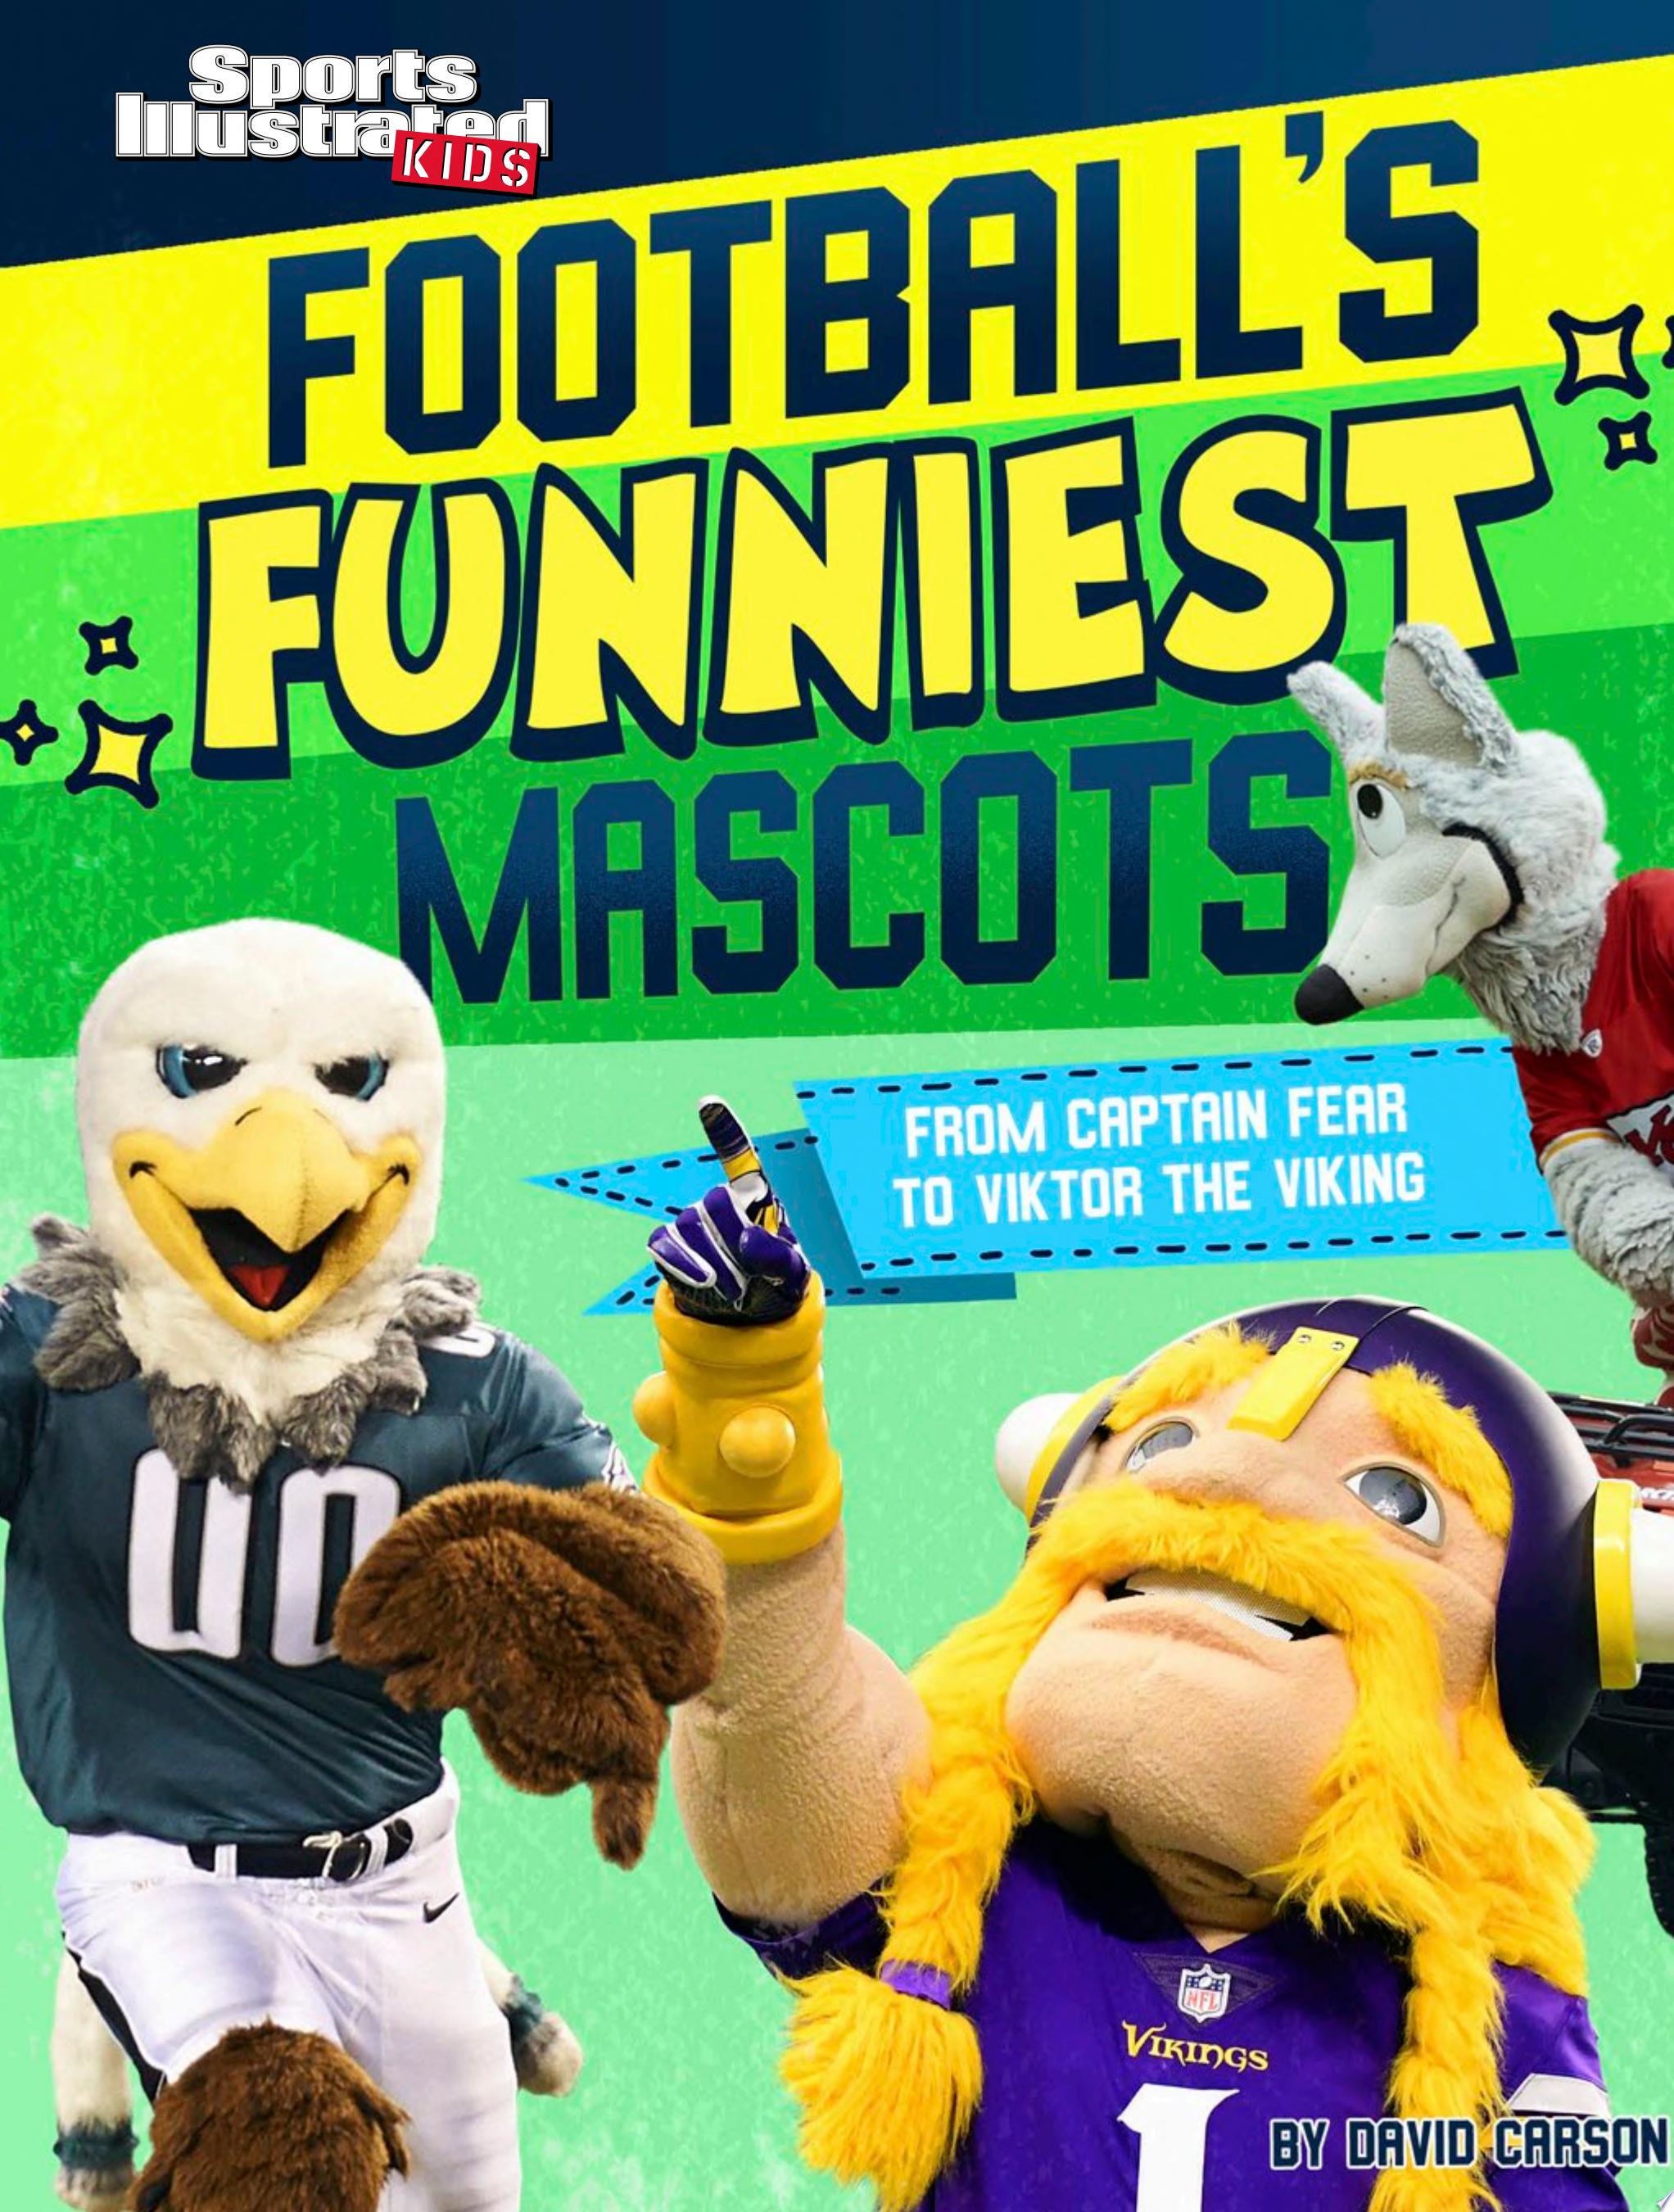 Image for "Football&#039;s Funniest Mascots"